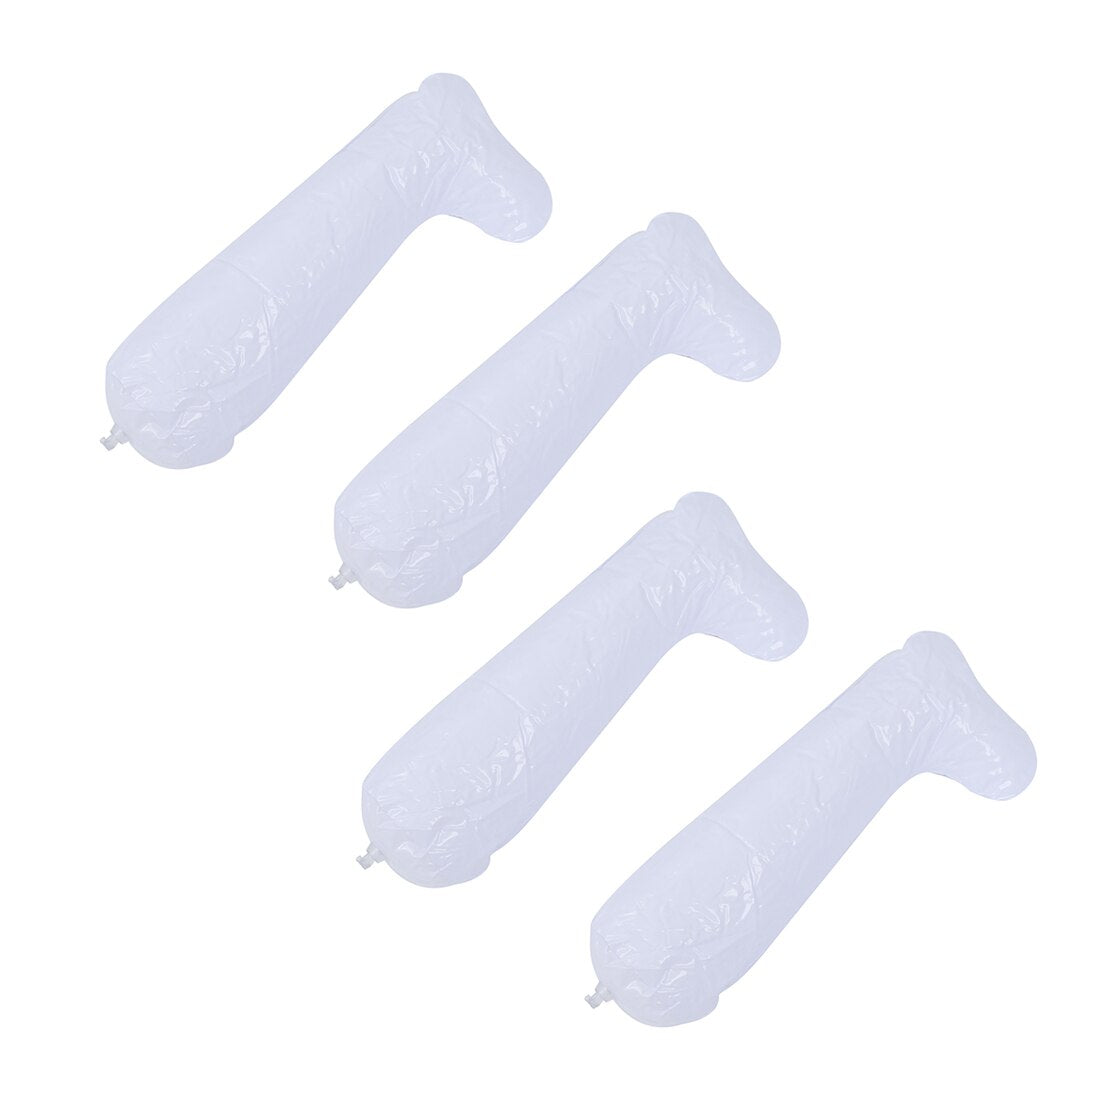 New 4 Pairs of 12 Inch White Film Inflatable Boot Stretcher Shaper Shoe Tree - ebowsos